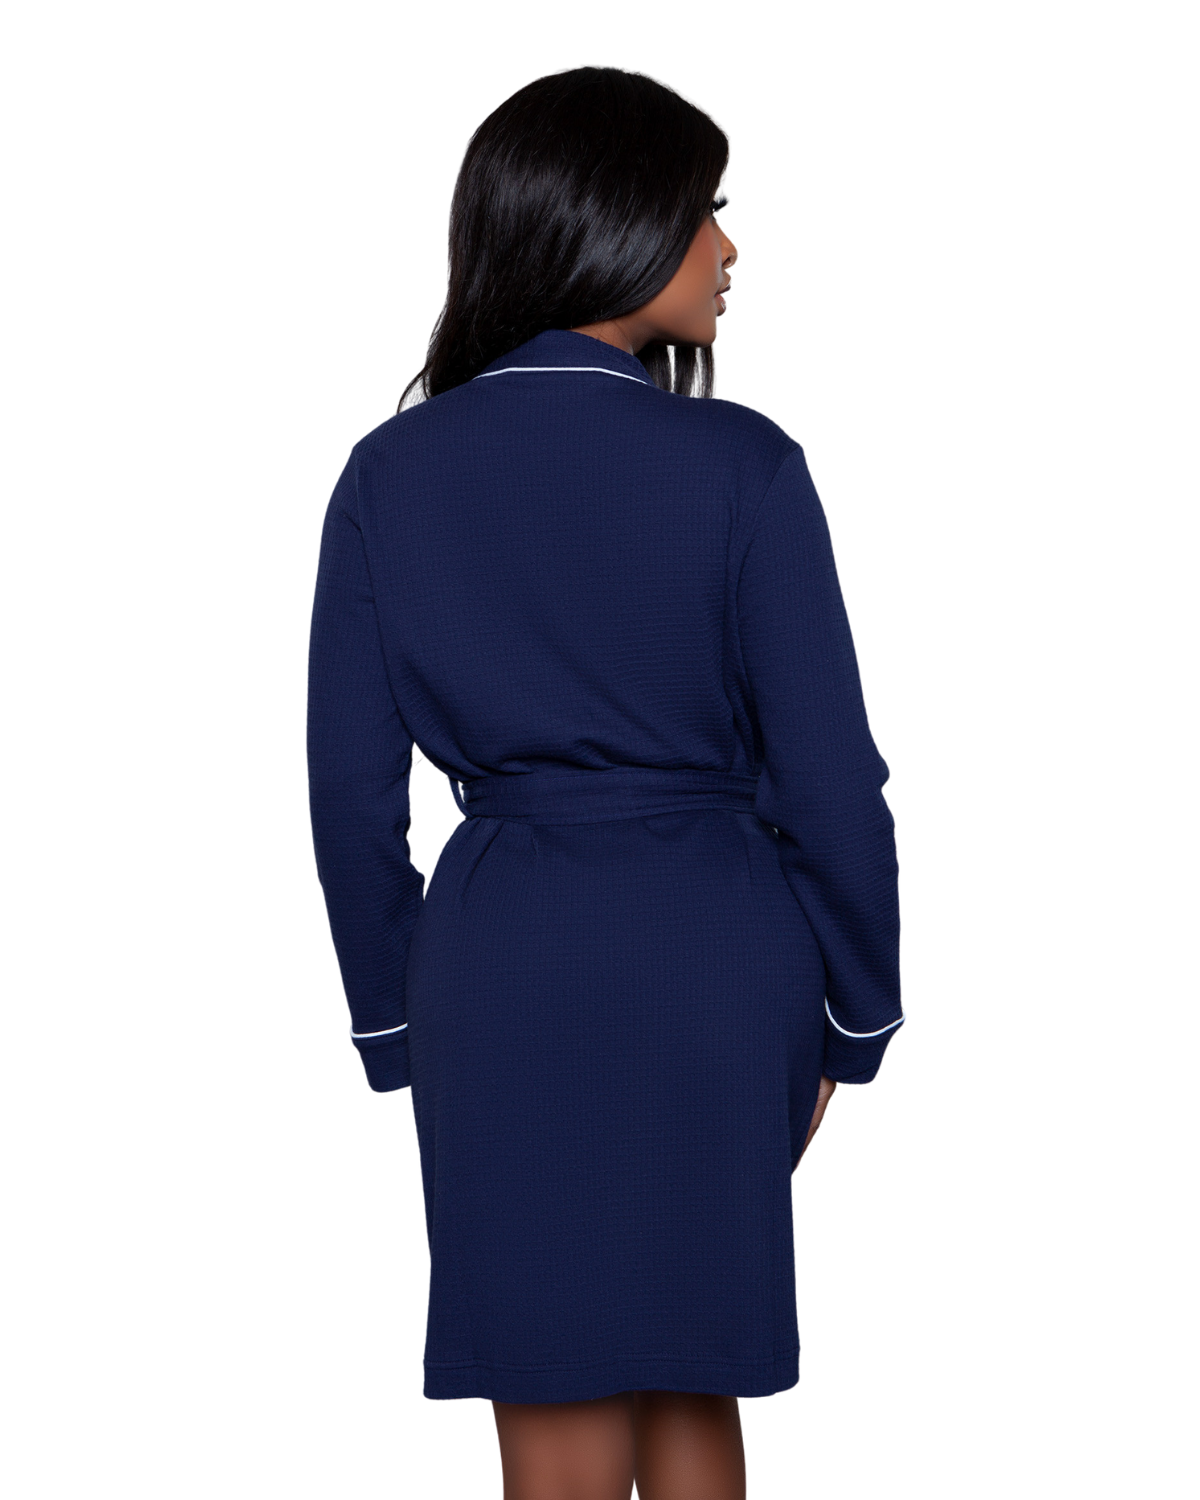 Model wearing a knee length robe in navy with white trim